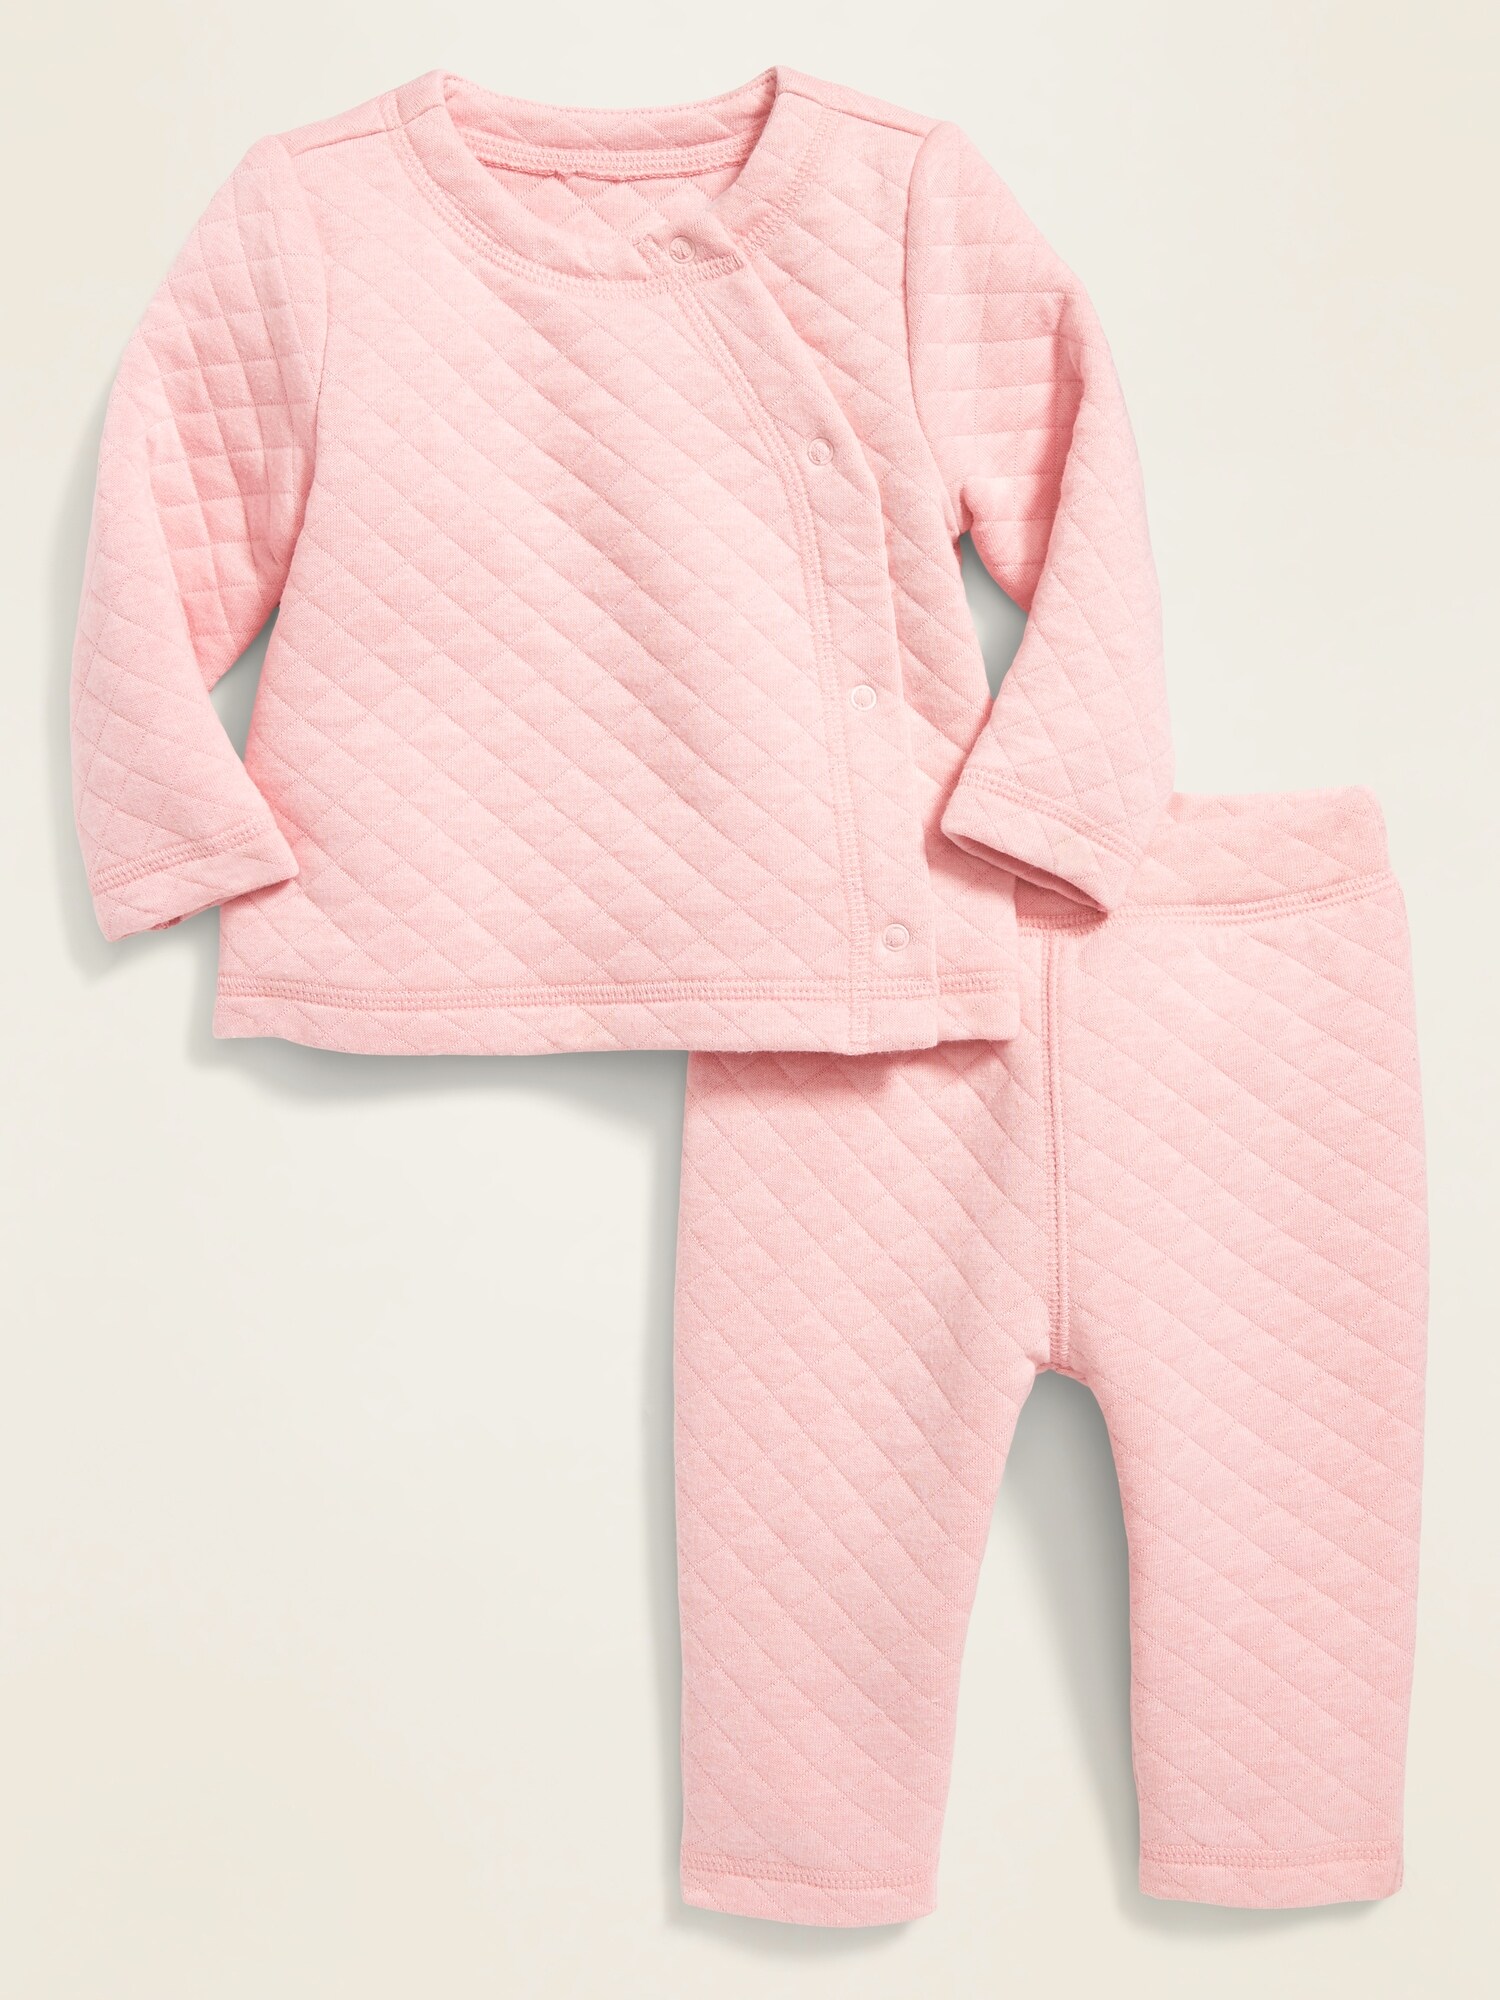 Diamond-Quilted Jersey Kimono Top & Pants Set for Baby | Old Navy